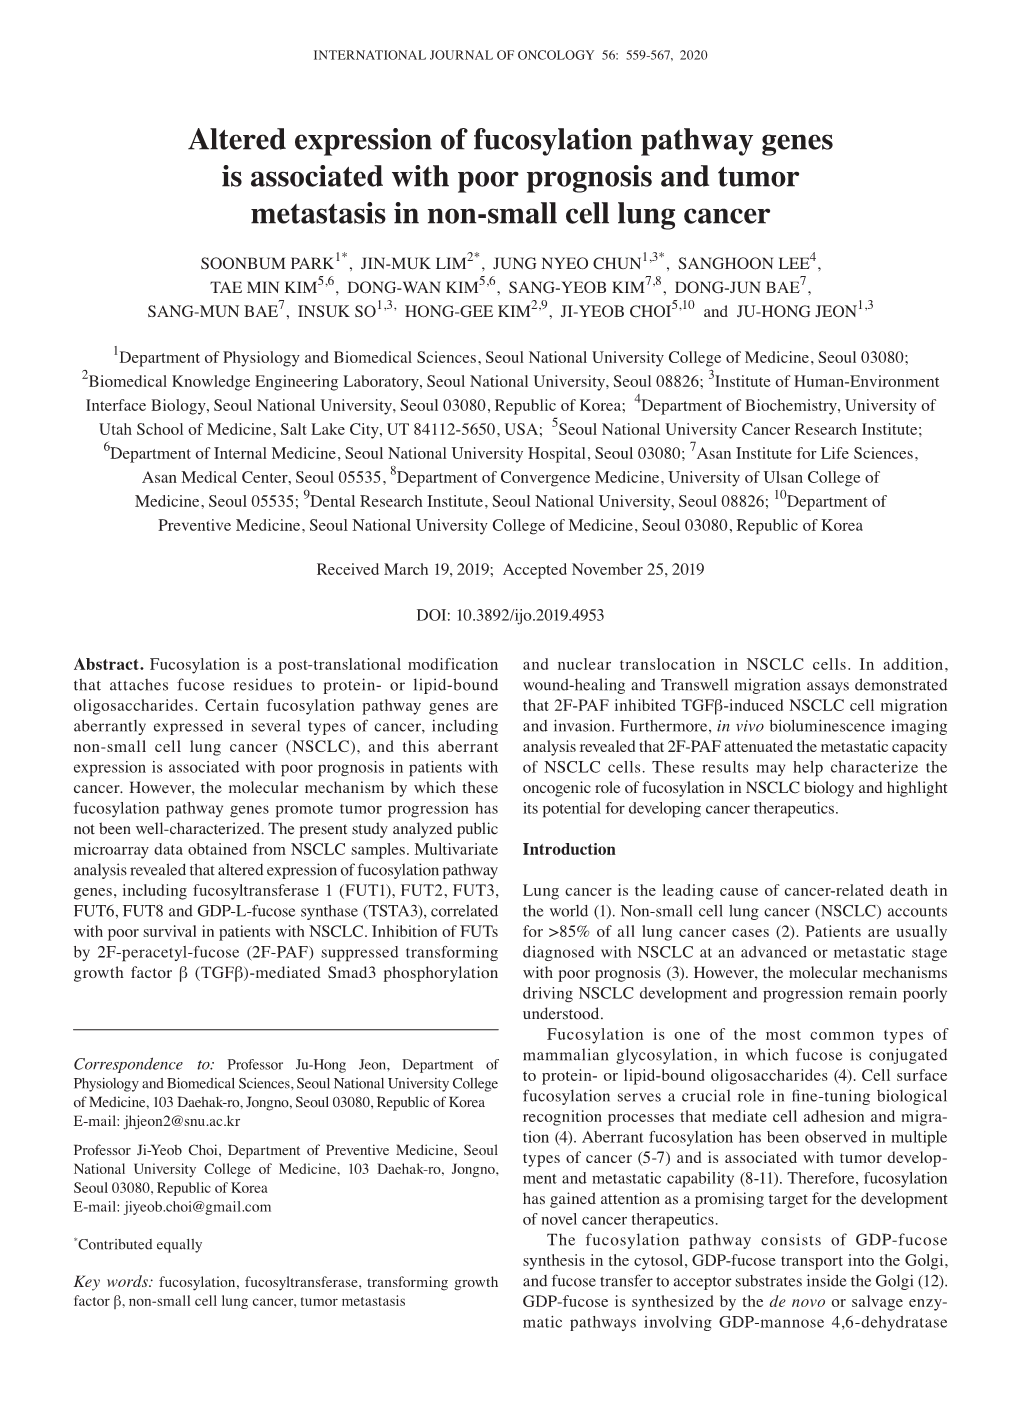 Altered Expression of Fucosylation Pathway Genes Is Associated with Poor Prognosis and Tumor Metastasis in Non‑Small Cell Lung Cancer